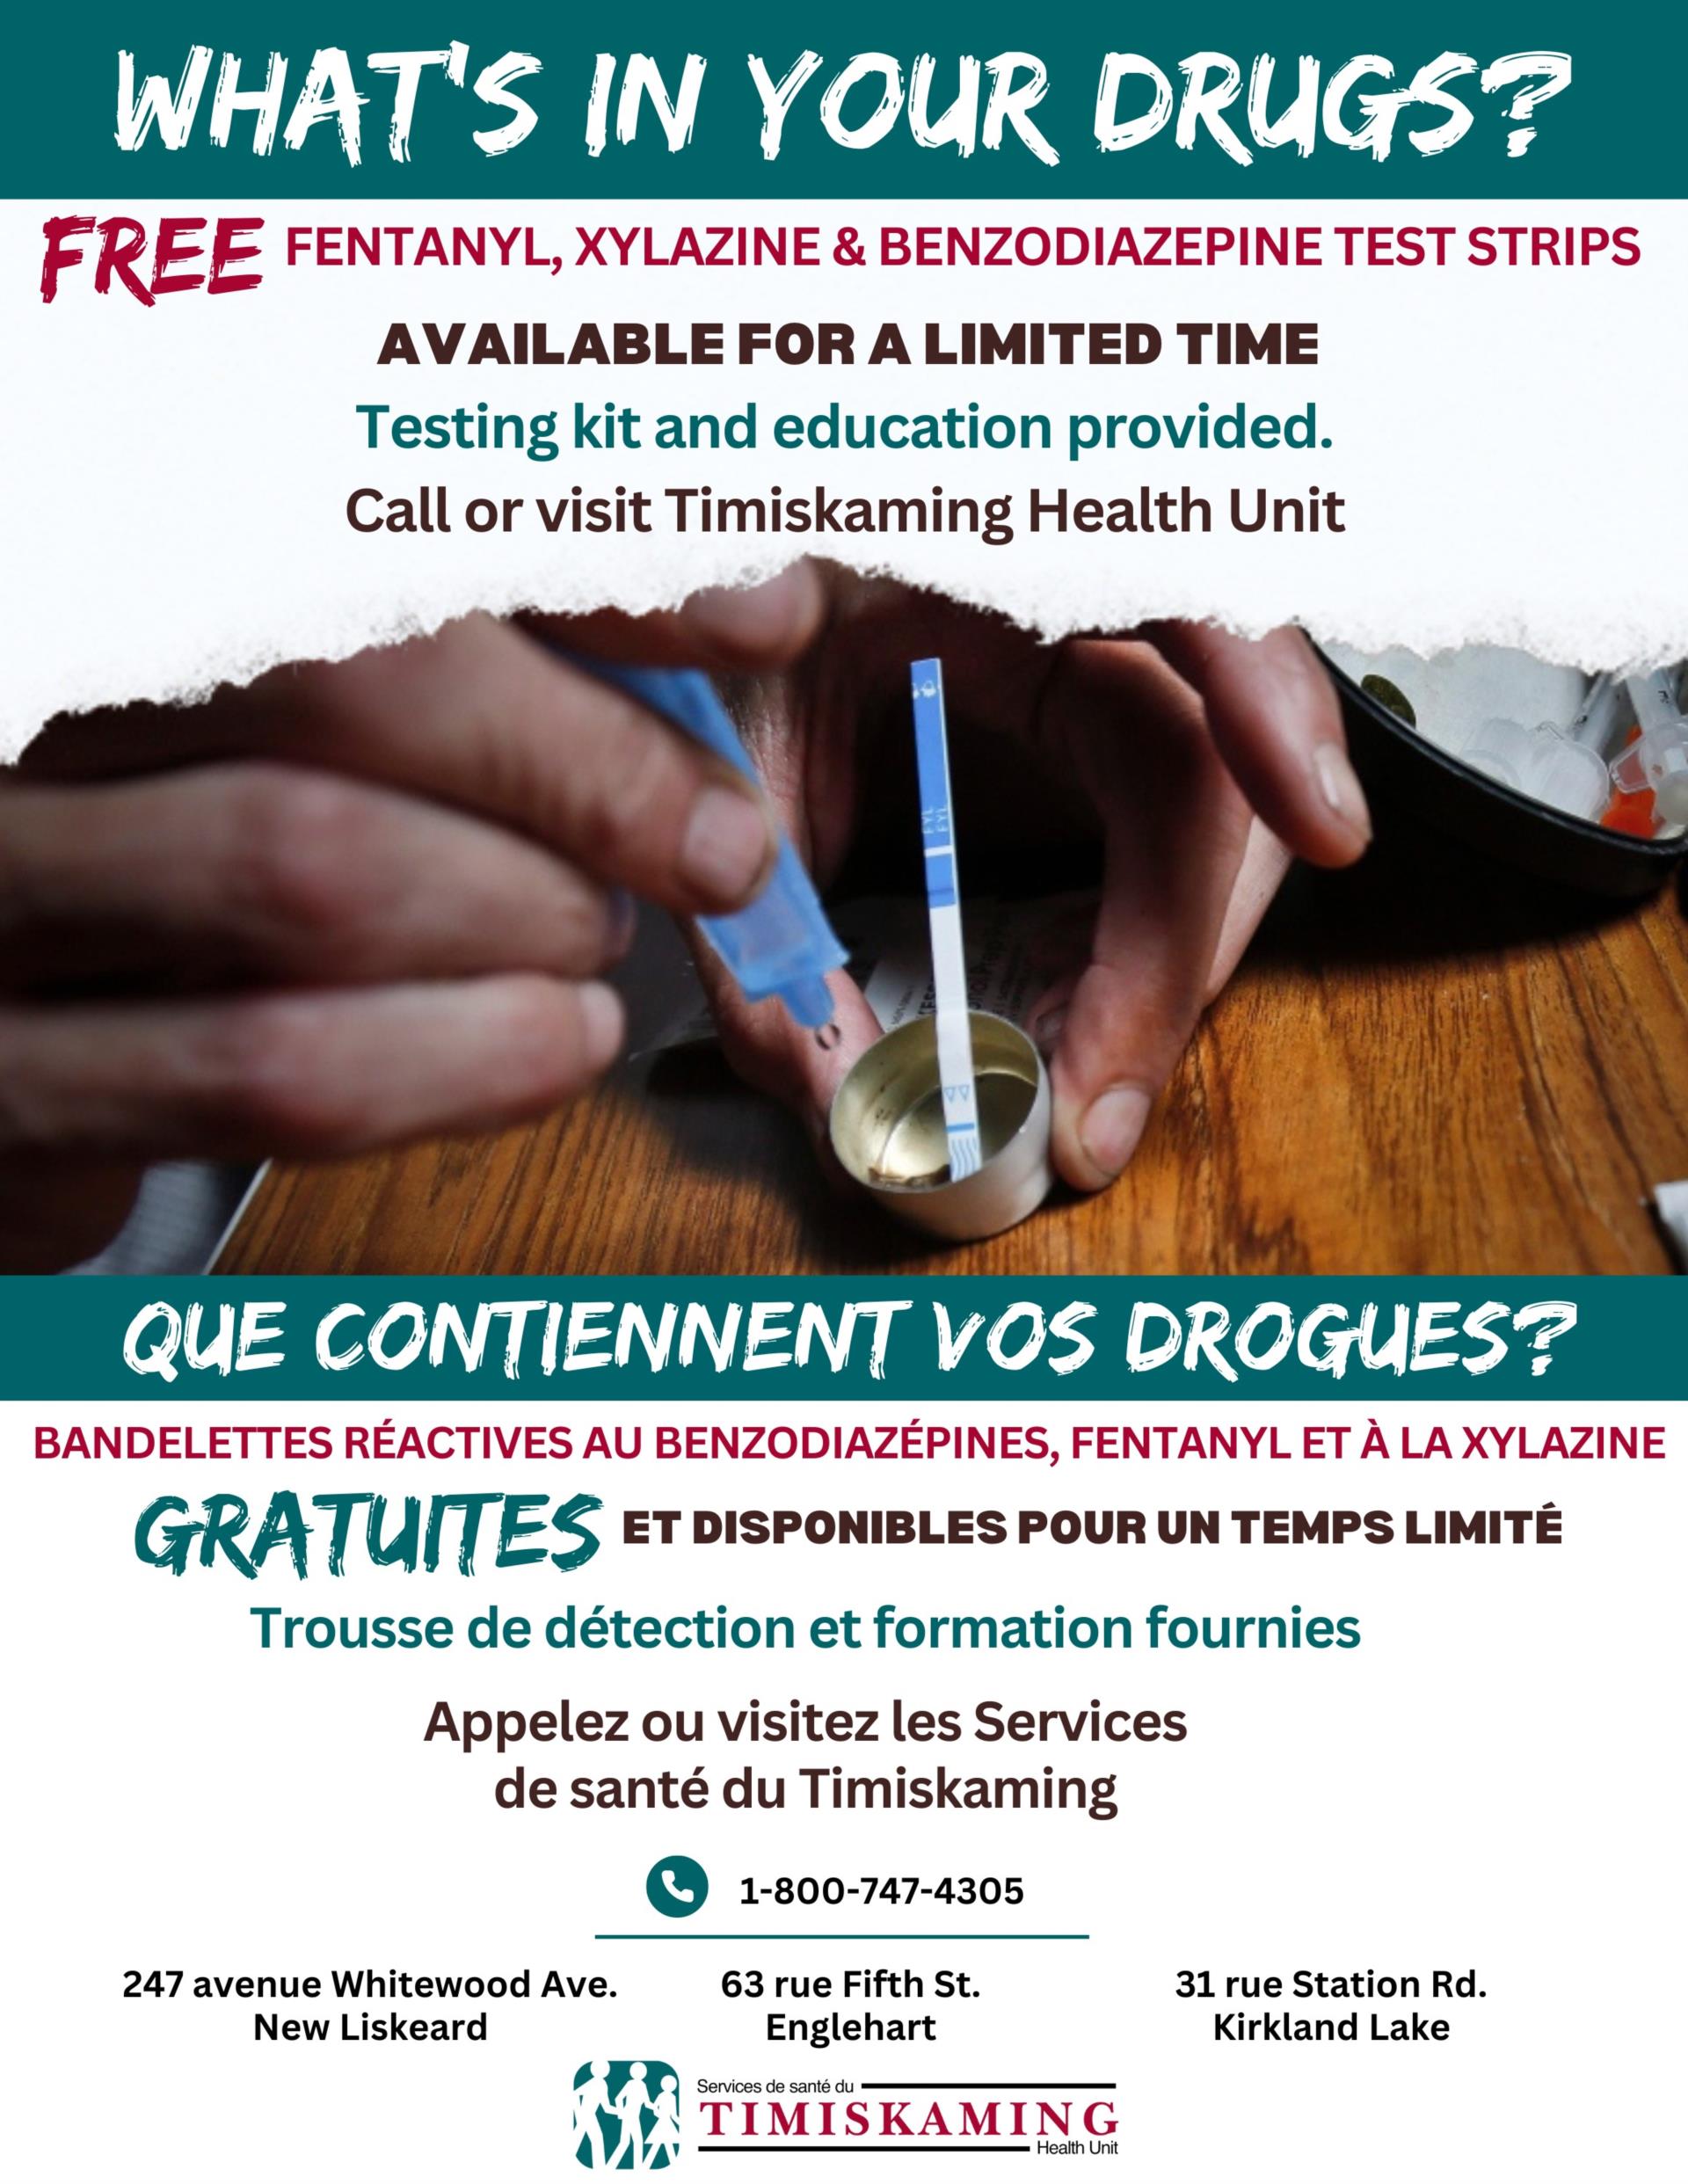 What's in your drugs? Free Fentanyl and Xylazine test strips available at THU